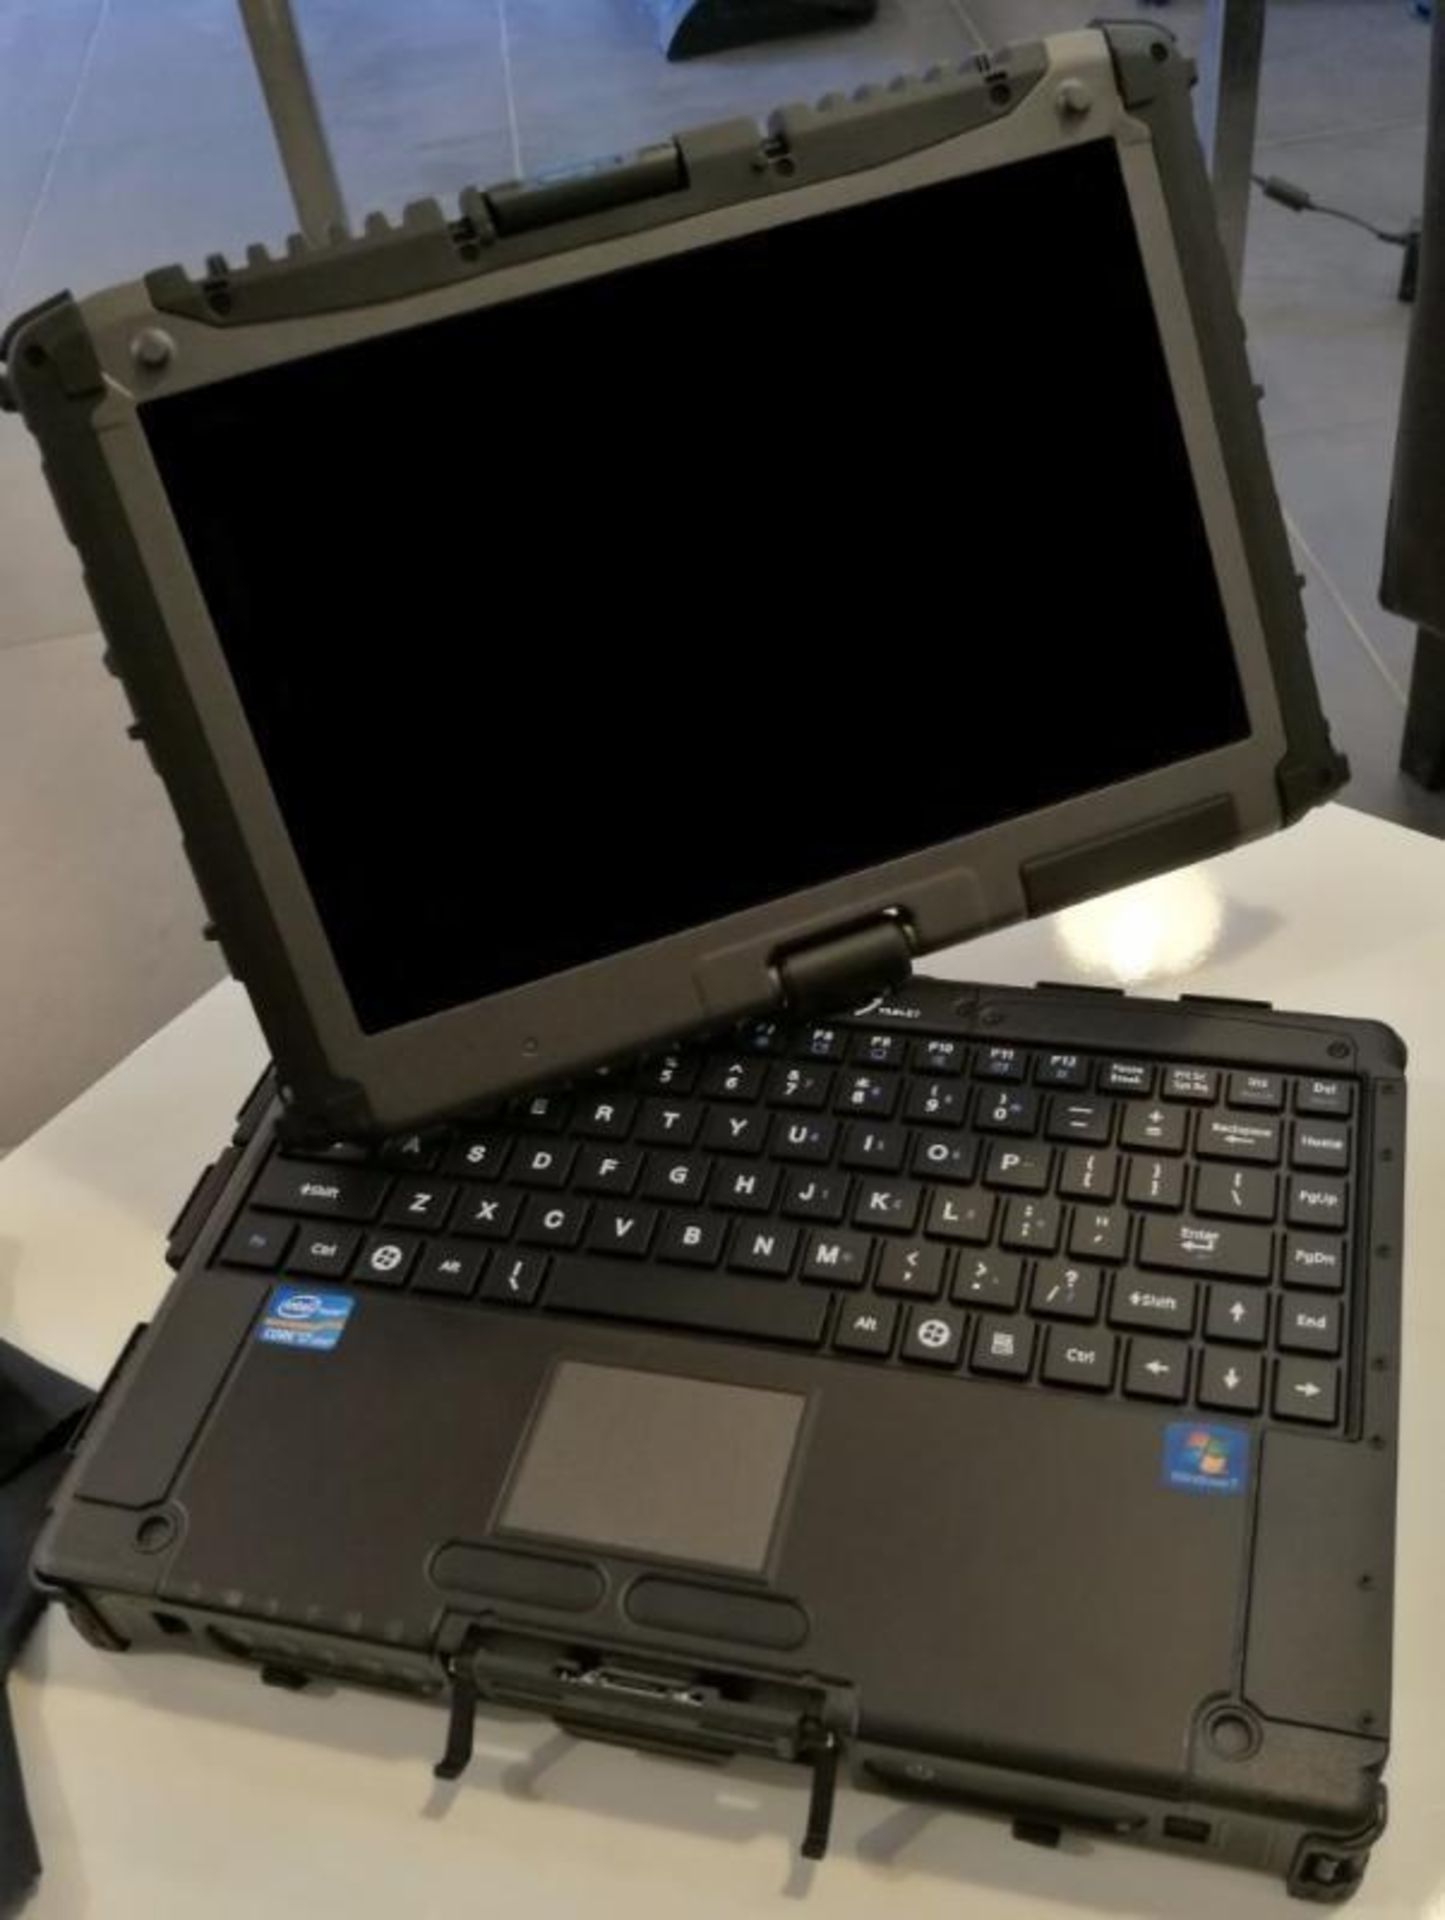 1 x Getac V200 Rugged Laptop Computer - Rugged Laptop That Transforms into a Tablet PC - Features an - Bild 6 aus 7